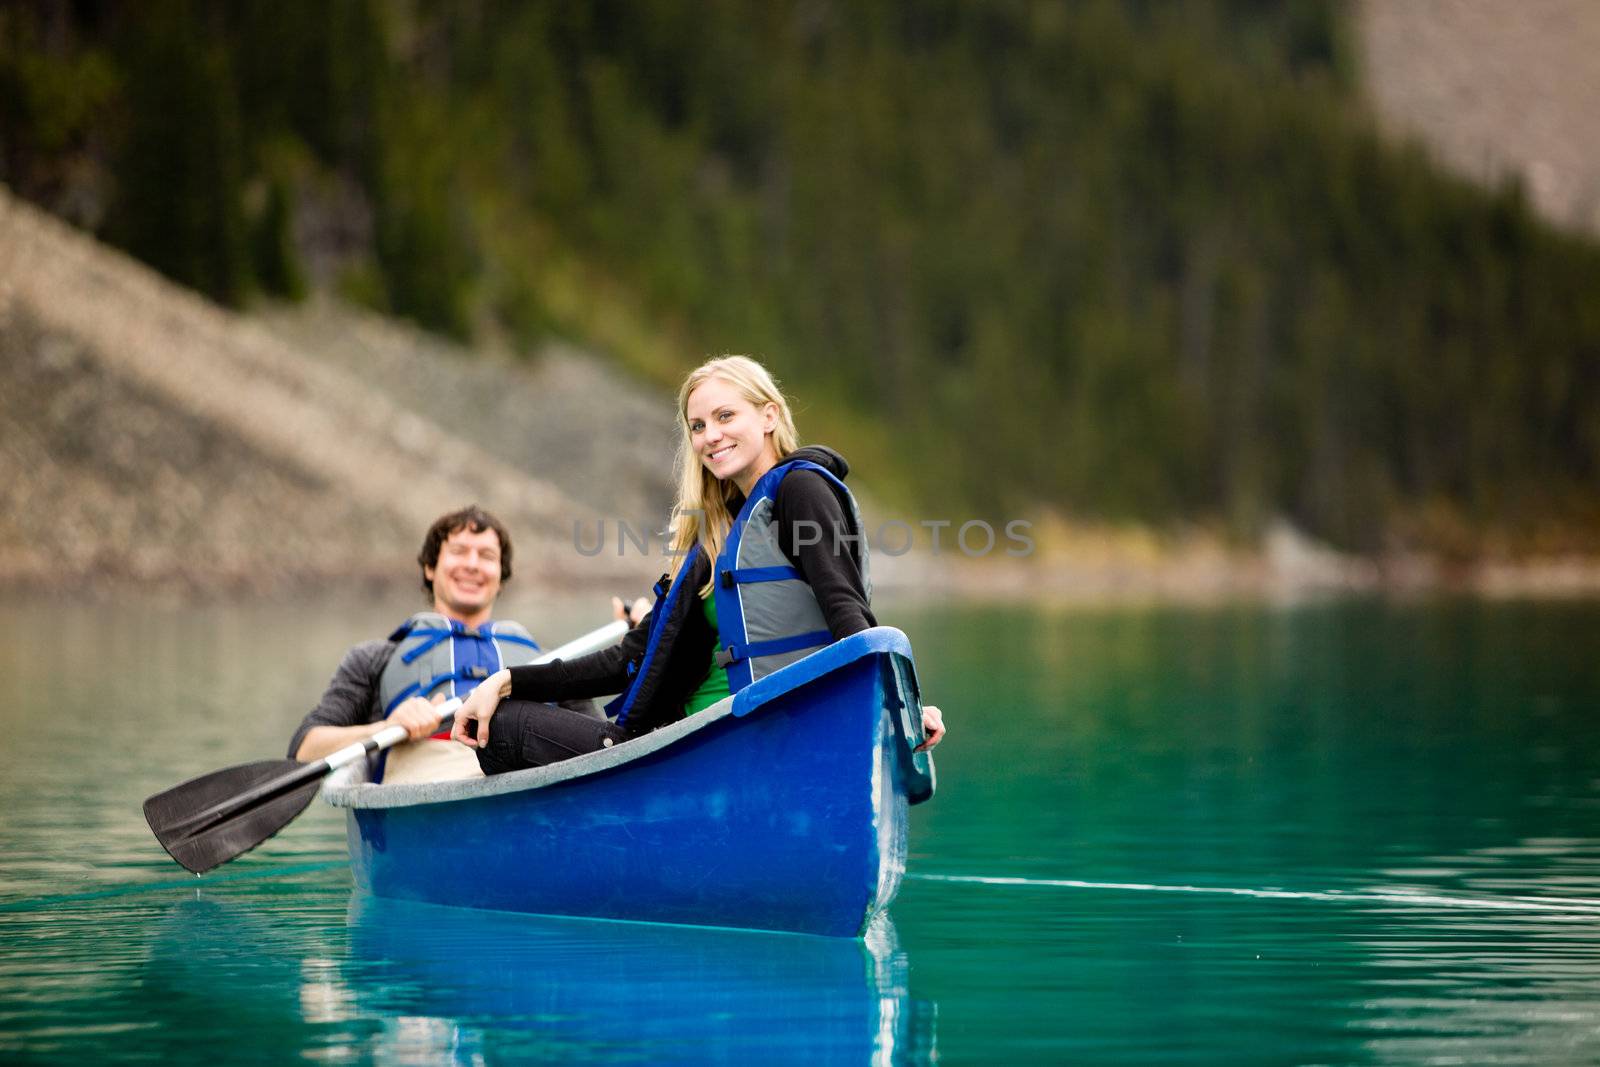 A portrait of a happy woman on a canoeing trip with a man